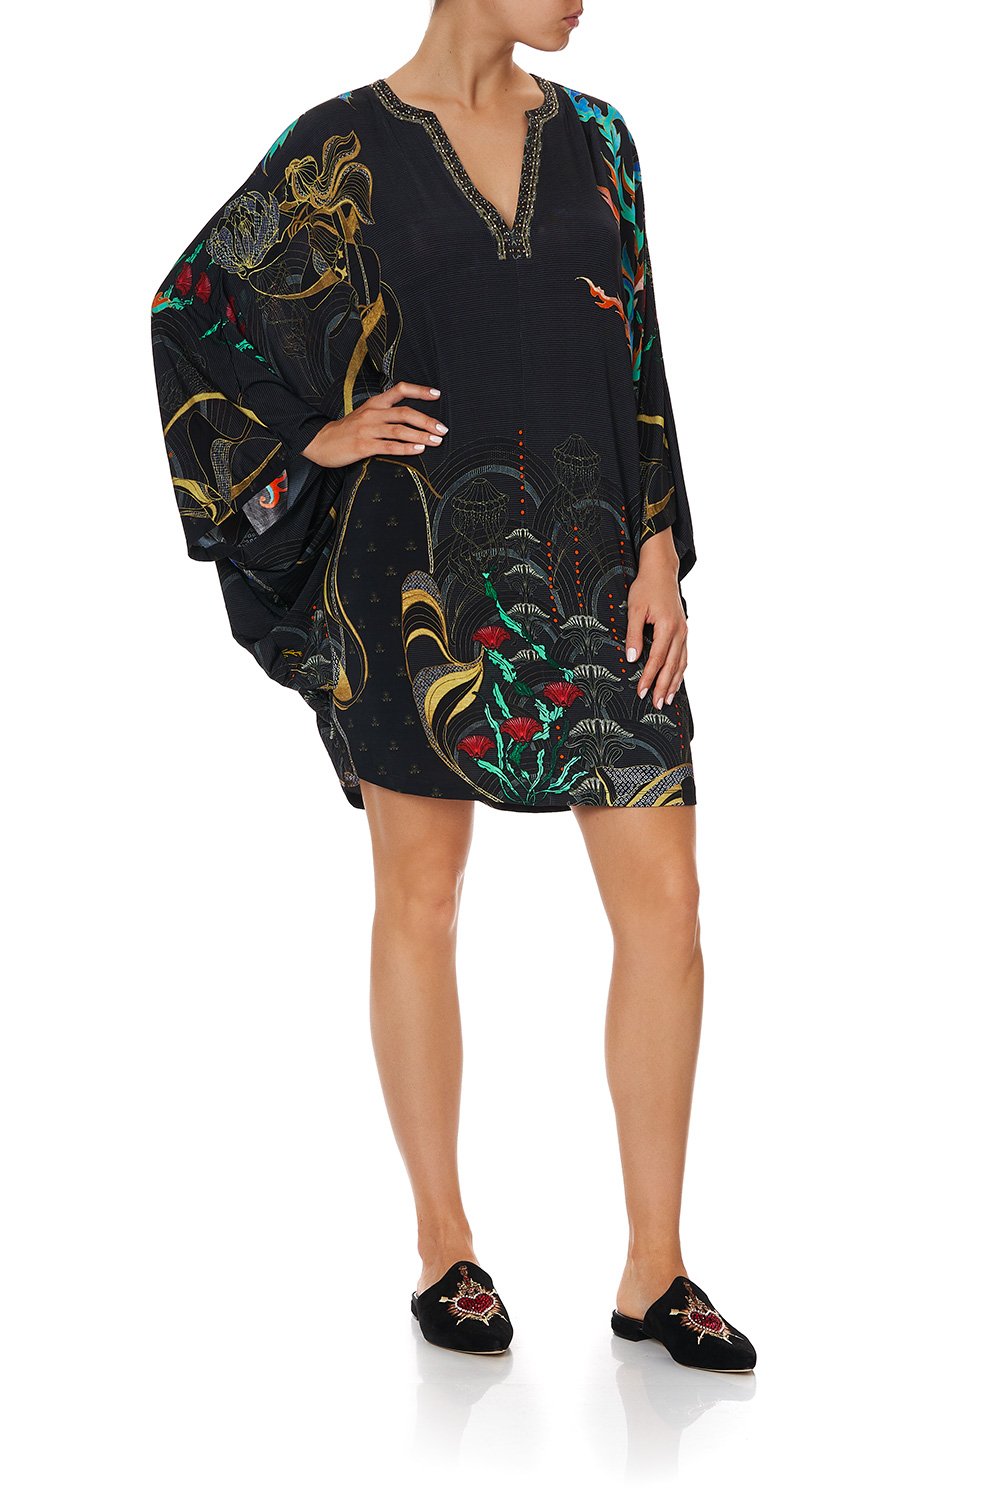 JERSEY SHORT KAFTAN WITH CURVED HEM WISE WINGS